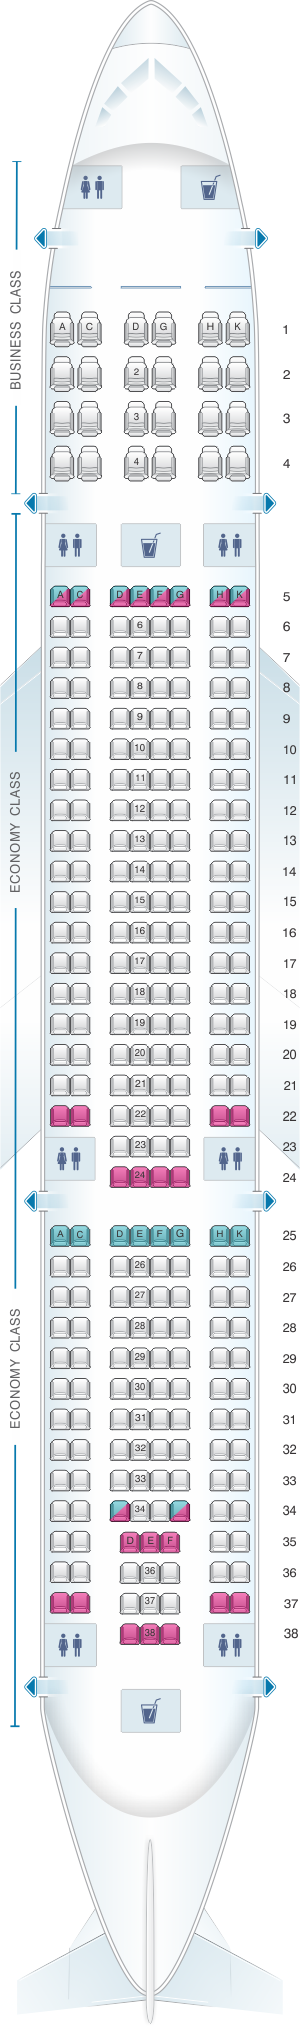 Vietnam Airlines A321 Seat Map